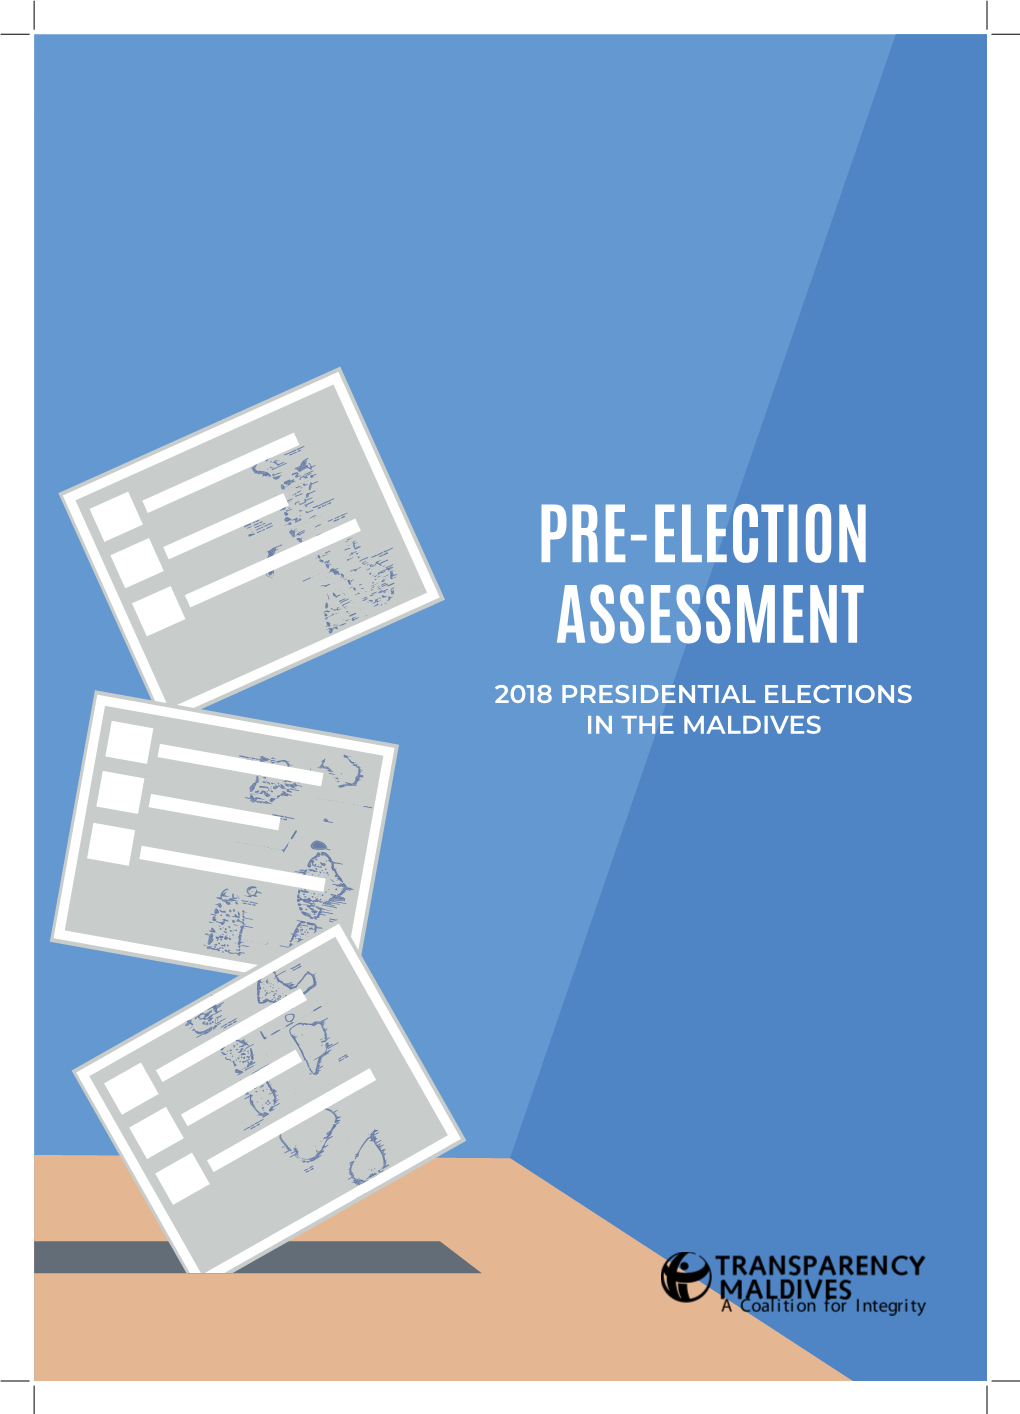 PRE-ELECTION ASSESSMENT 2018 PRESIDENTIAL ELECTIONS in the MALDIVES Pre-Election Assessment |2018 Presidential Elections in the Maldives